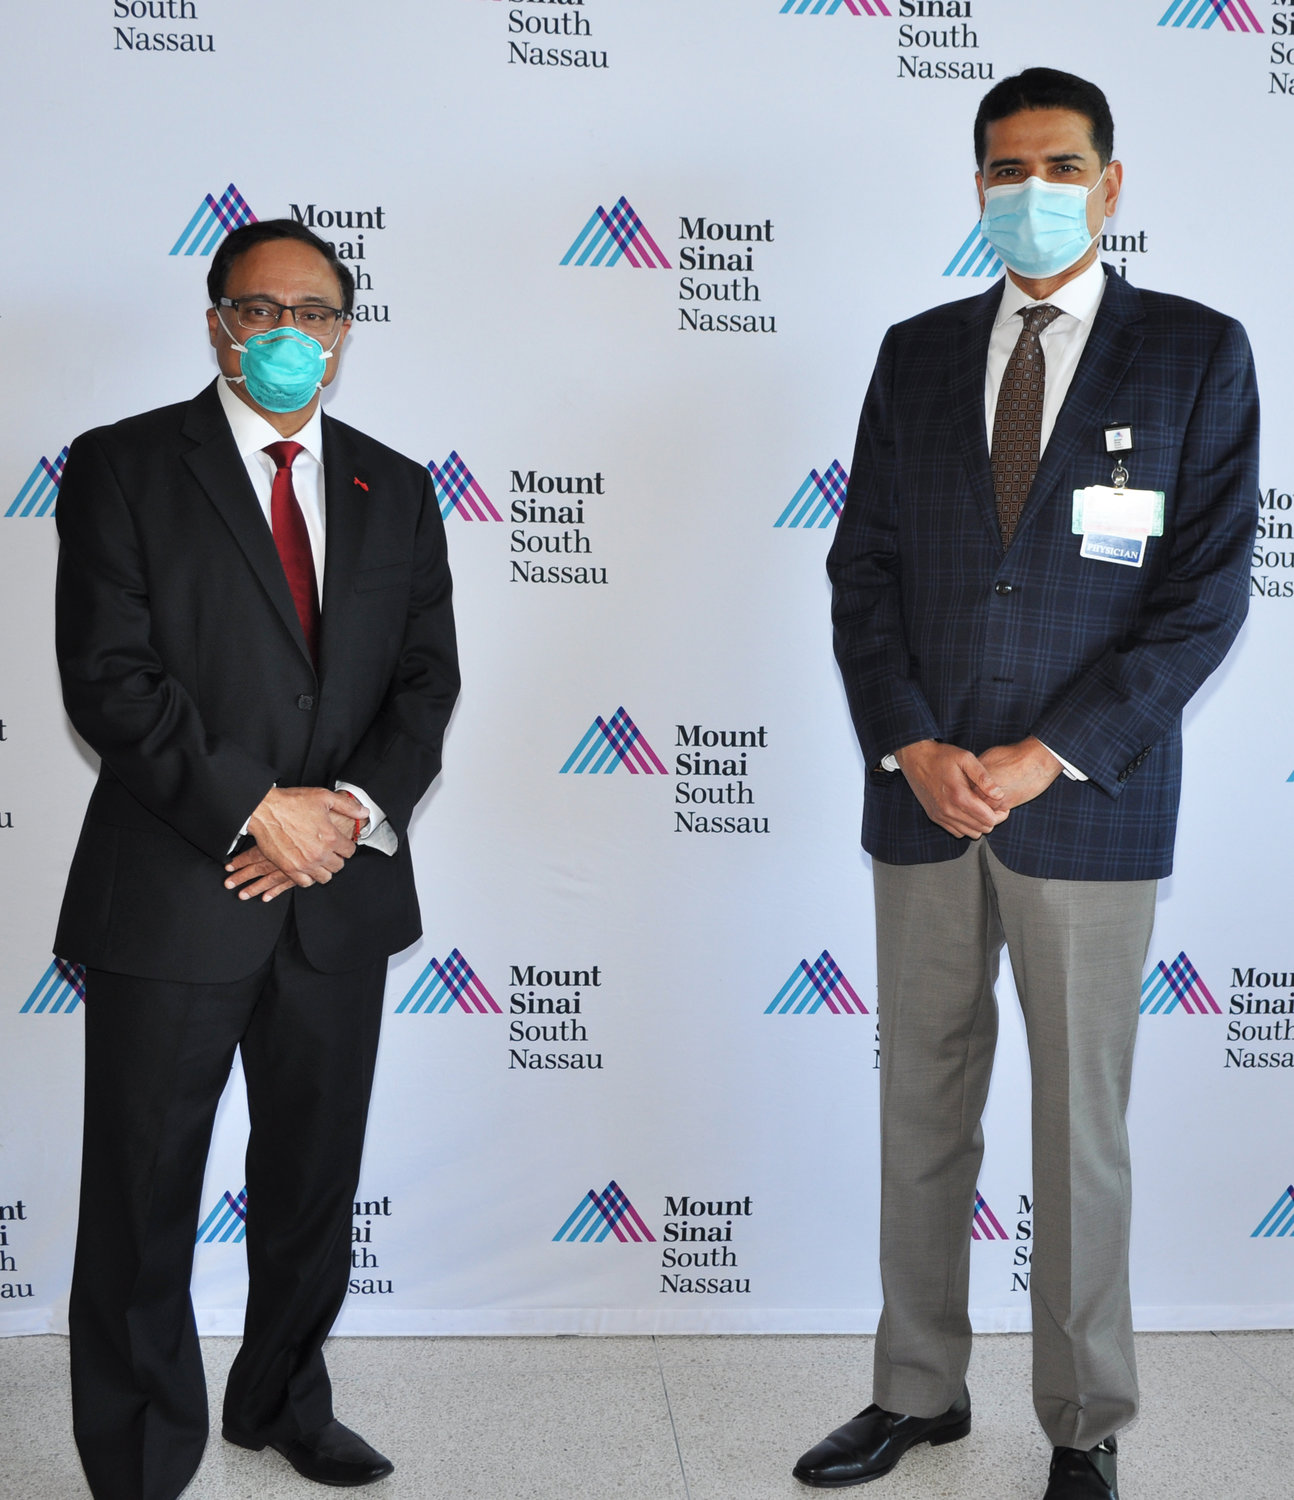 Dr. Abhay Malhotra, president of American Association of Physicians of Indian Origin, Queens Long Island, left, and Dr. Rajiv Datta, chair of the Department of Surgery at Mount Sinai South Nassau, spearheaded the effort.